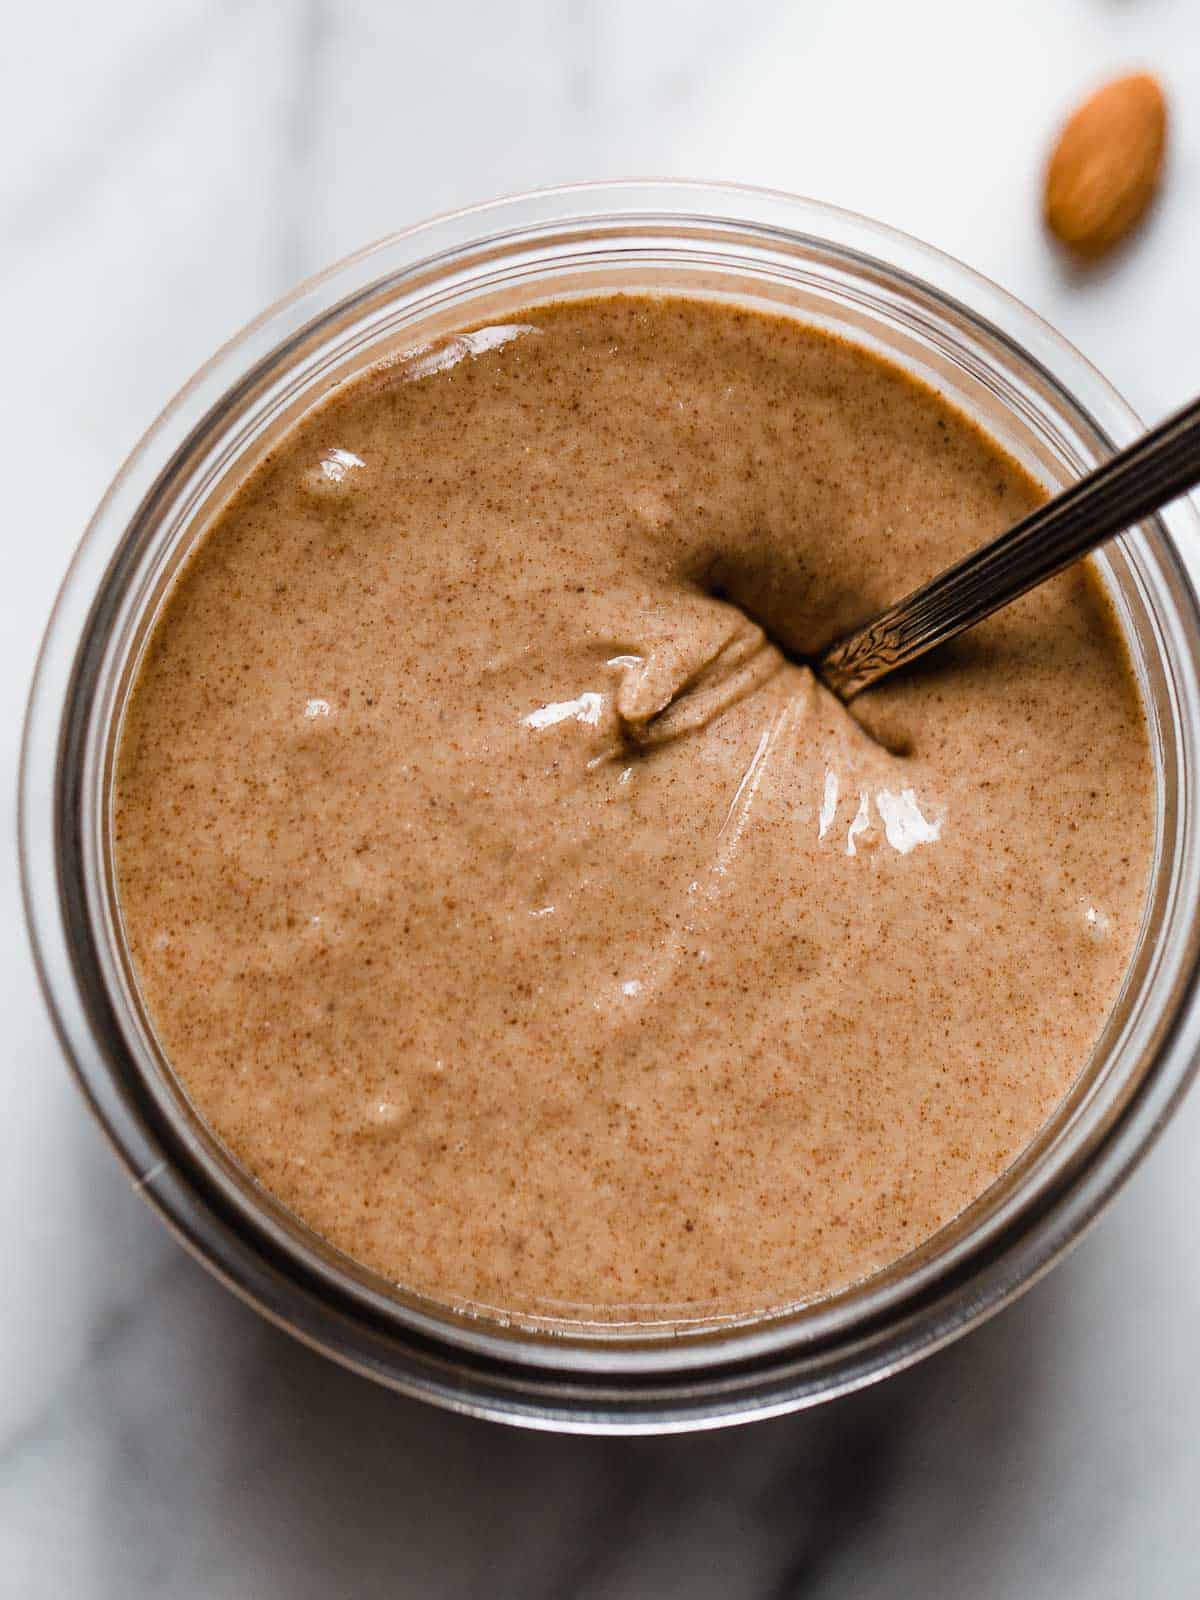 Homemade almond butter in a weck jar with a spoon.